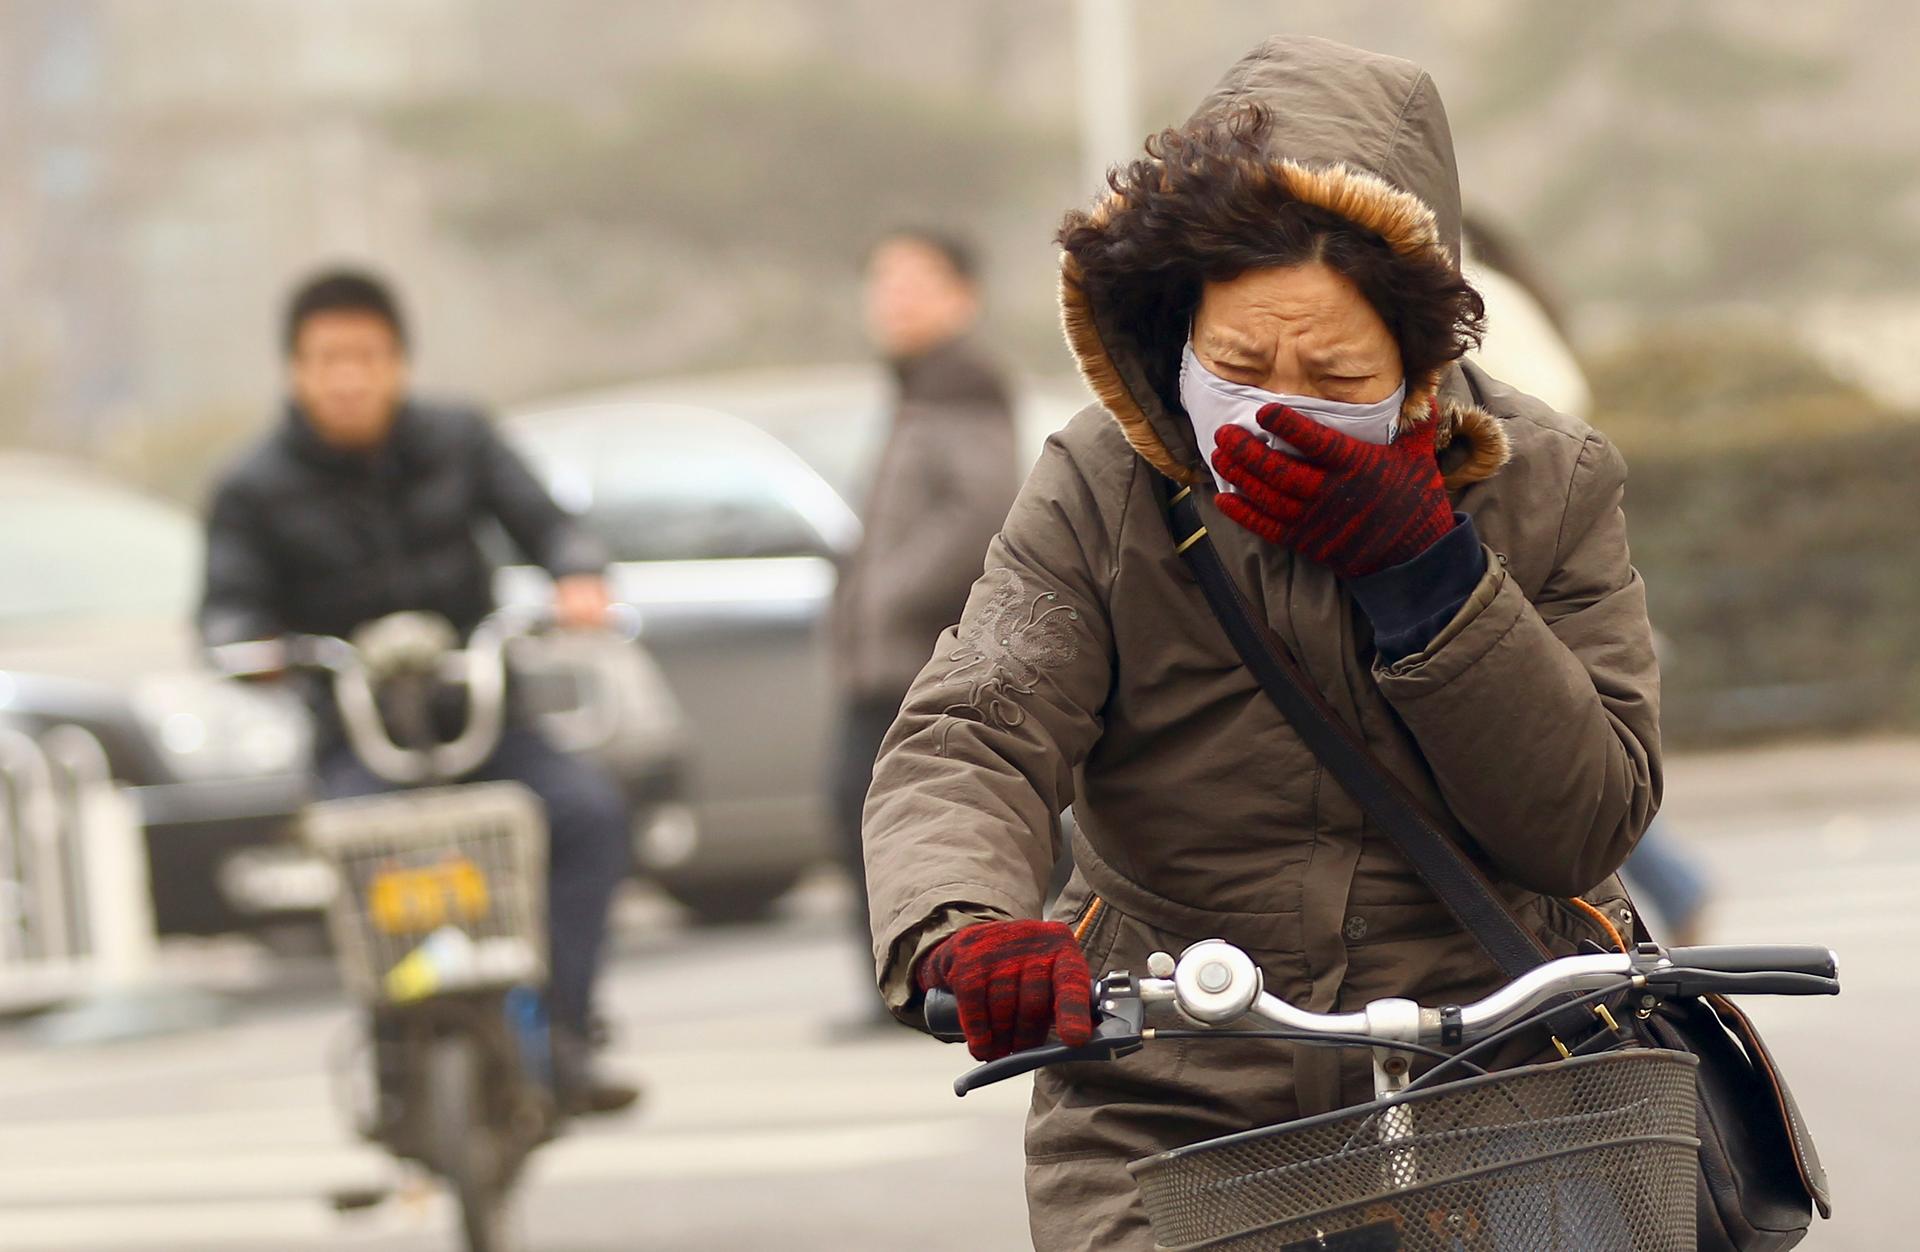 A woman wearing a mask rides her bicycle along a street on a hazy morning in Beijing, February 28, 2013. Beijing's environmental authorities said that day air quality in Beijing and nearby regions hit dangerous levels, Xinhua News Agency reported.